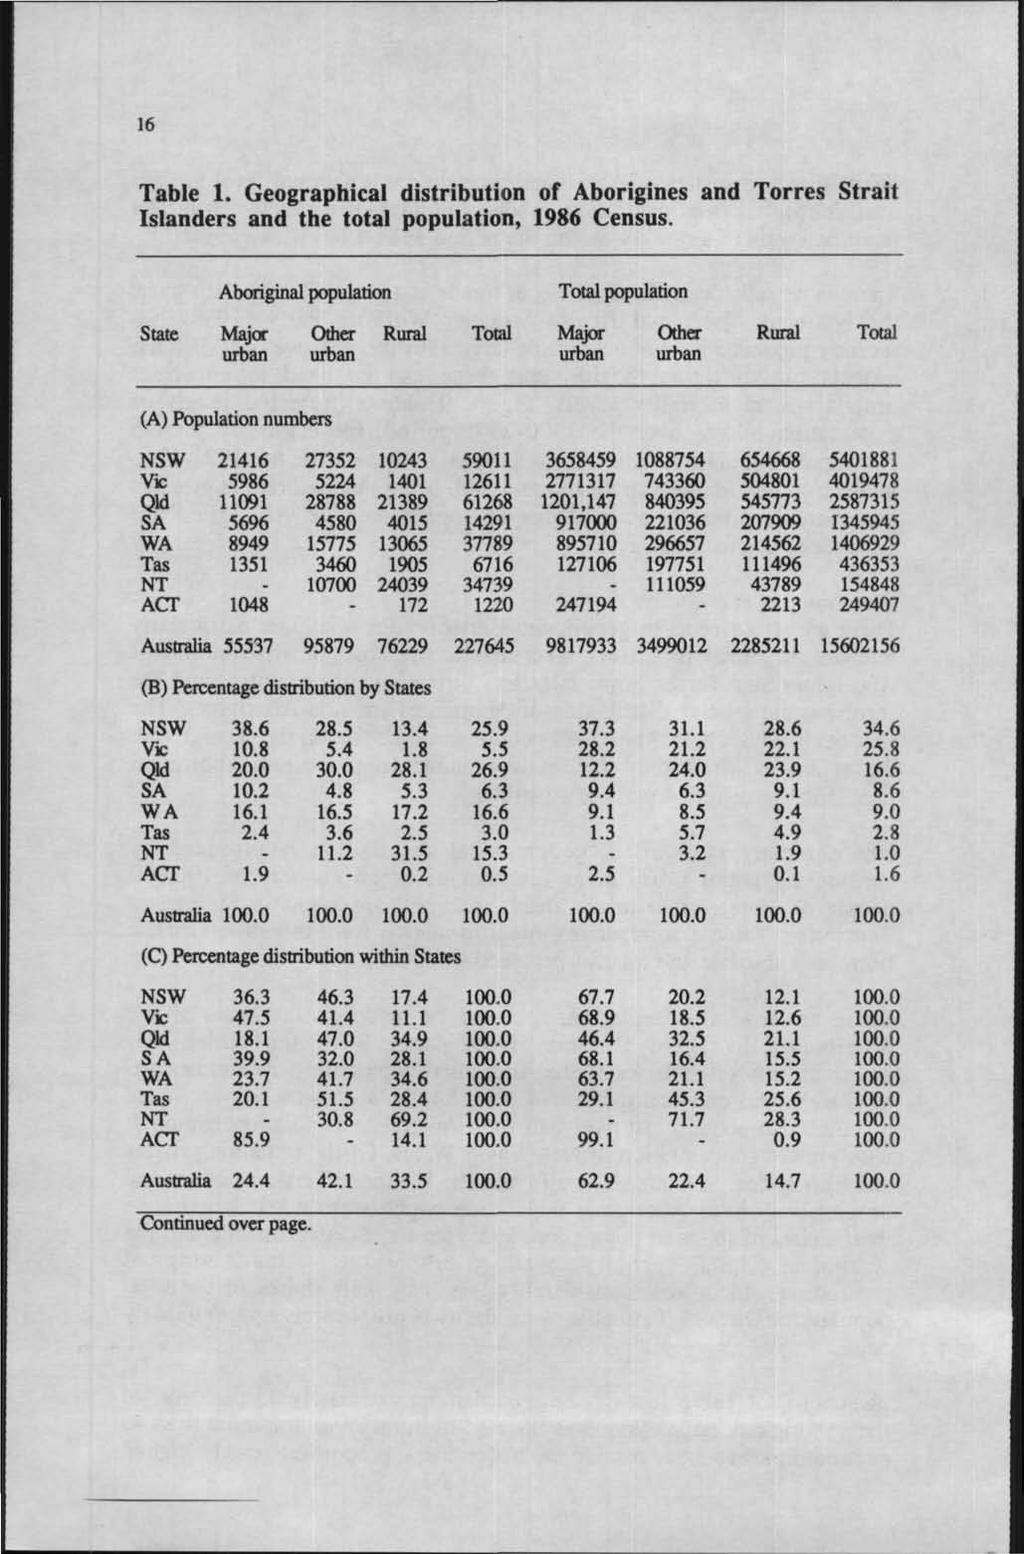 16 Table 1. Geographical distribution of Aborigines and Torres Strait Islanders and the total population, 1986 Census.